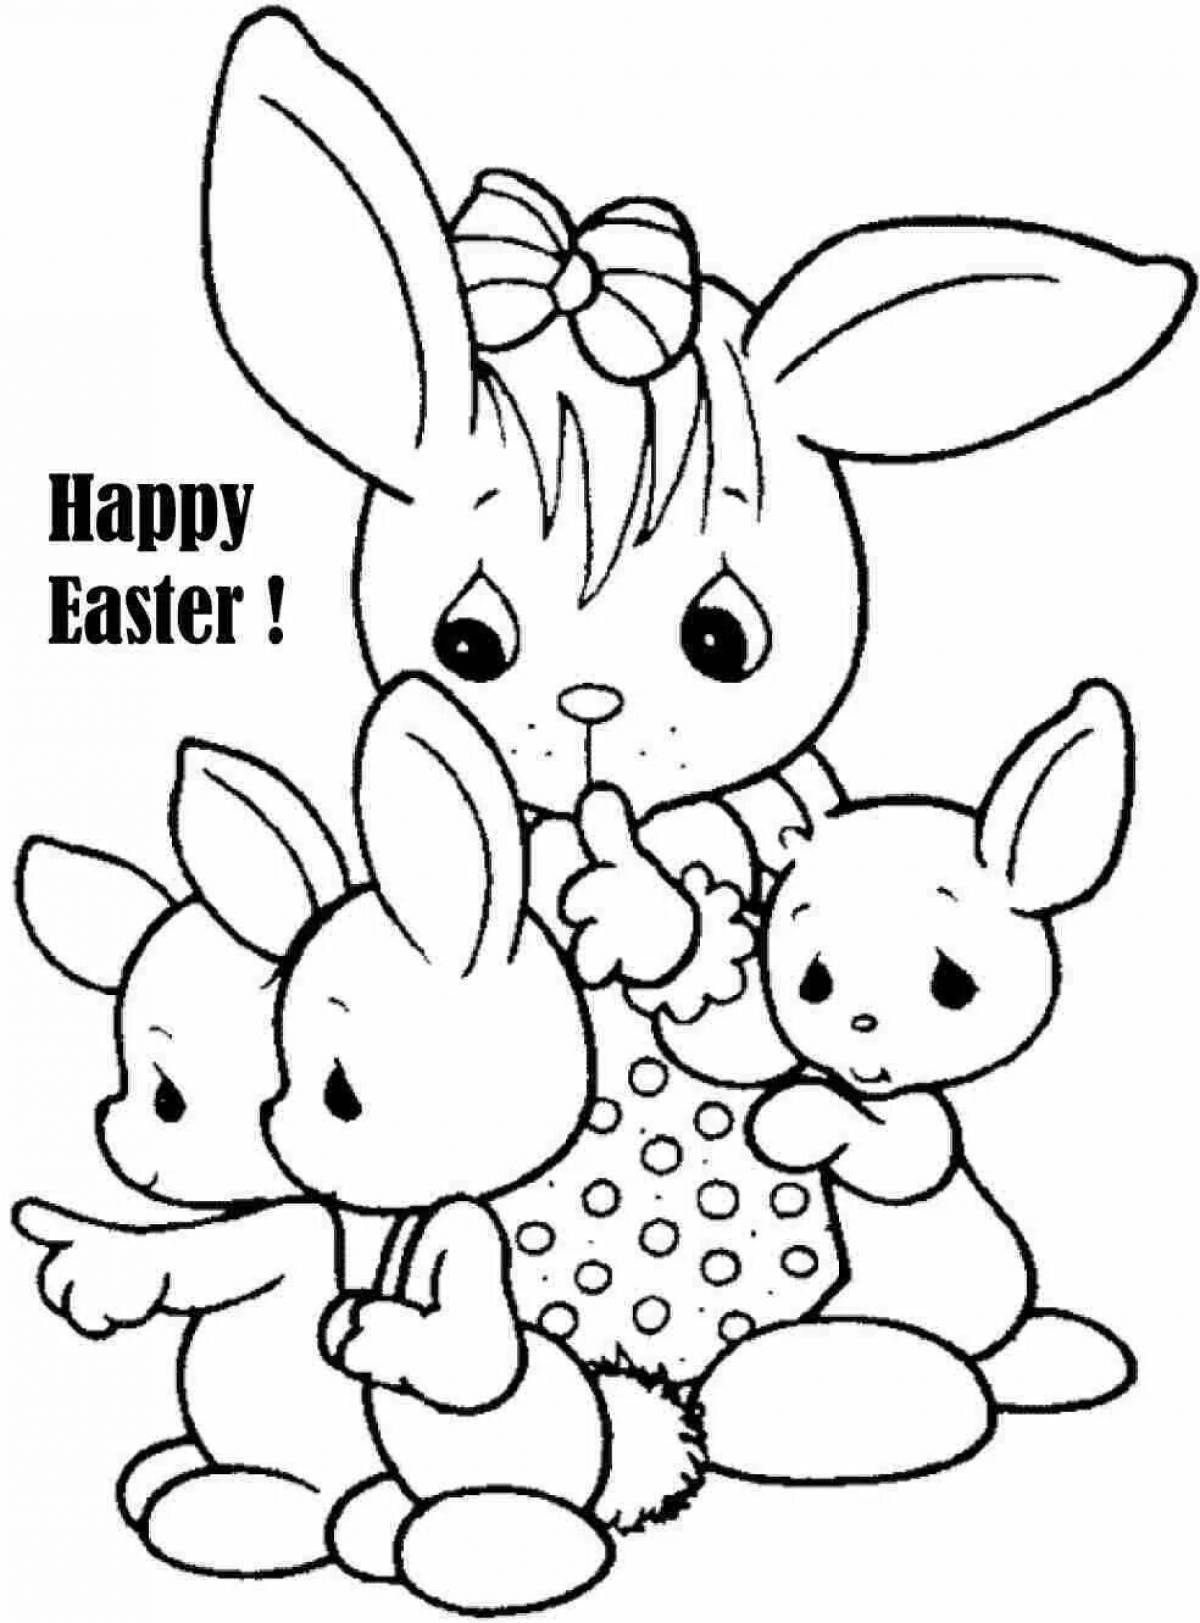 Fancy rabbit coloring page for girls